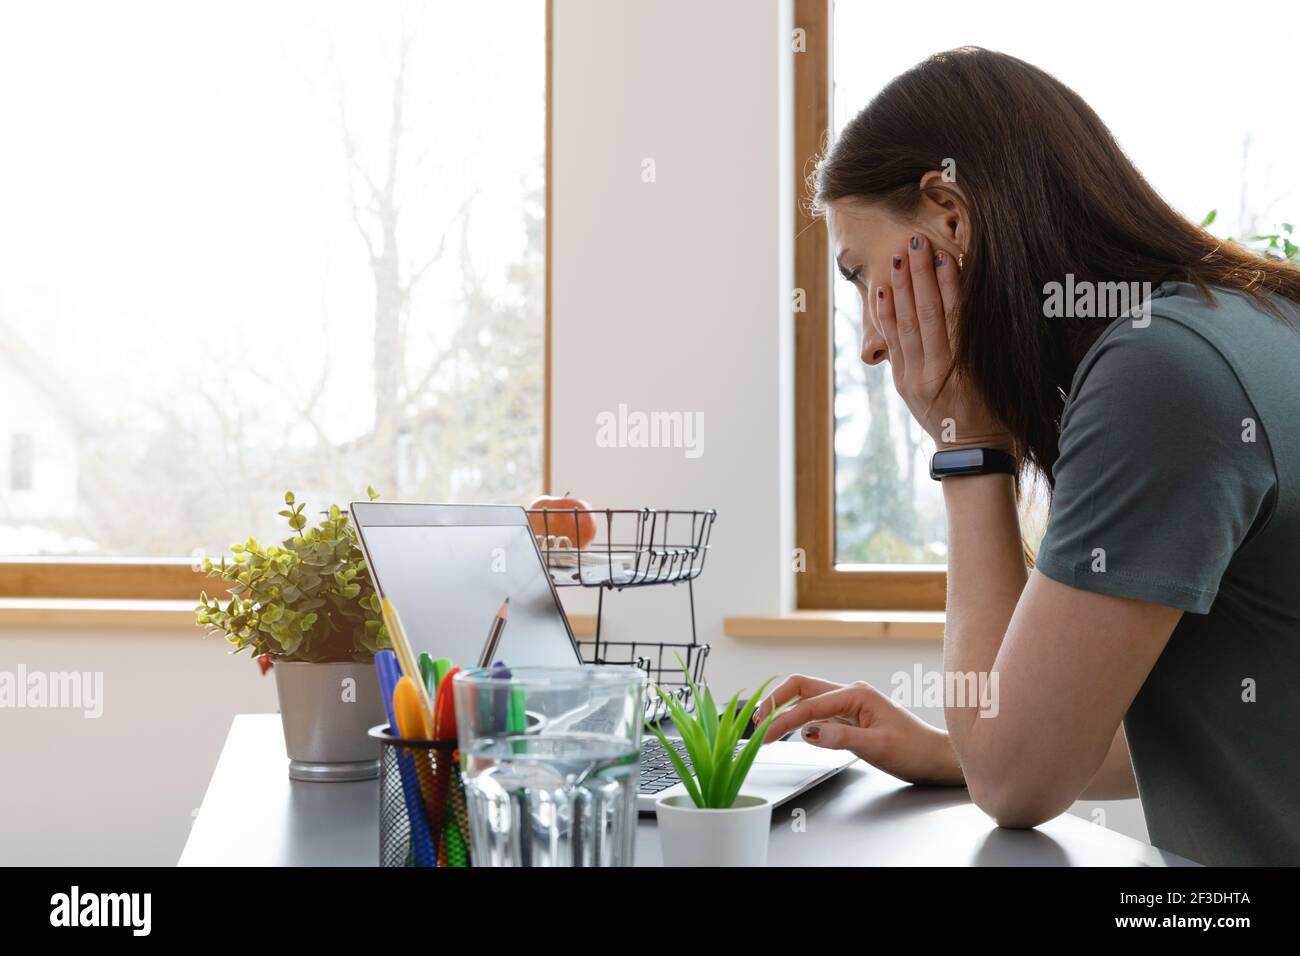 Women browsing in internet by using a mouse pad. Working from home a new normal working concept. Stock Photo